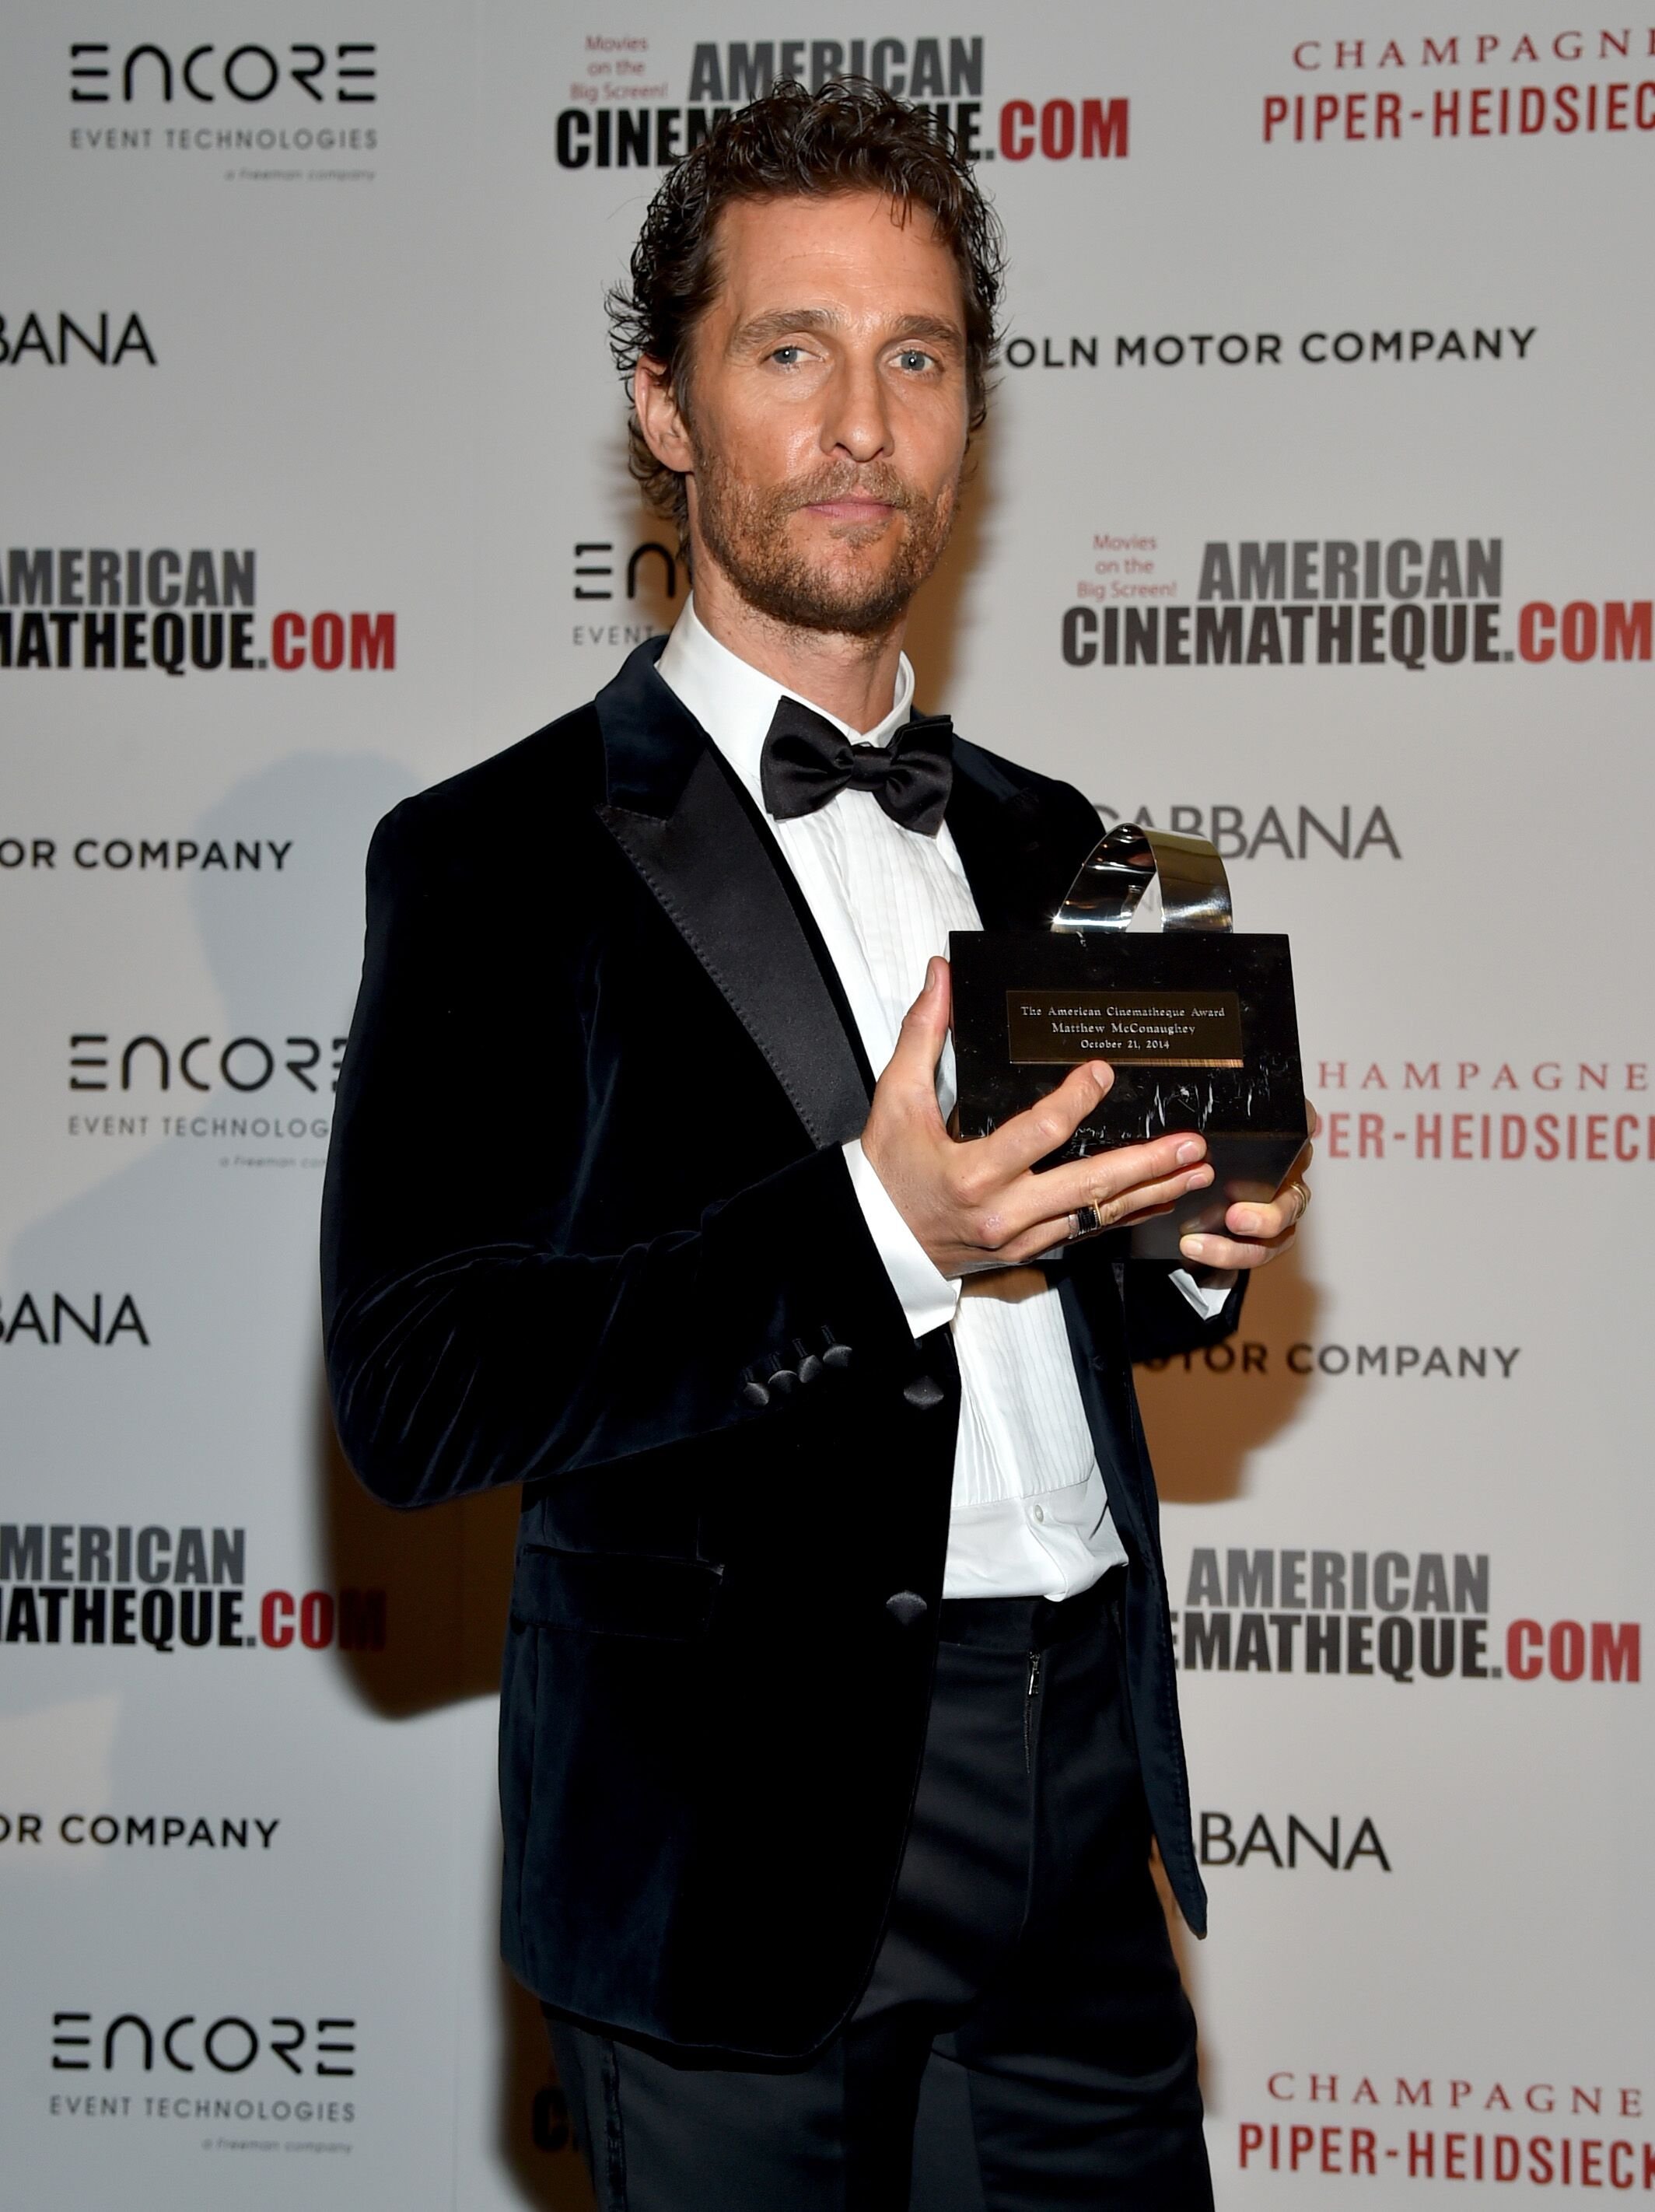  Matthew McConaughey attends the 28th American Cinematheque Award in 2014 | Source: Getty Images